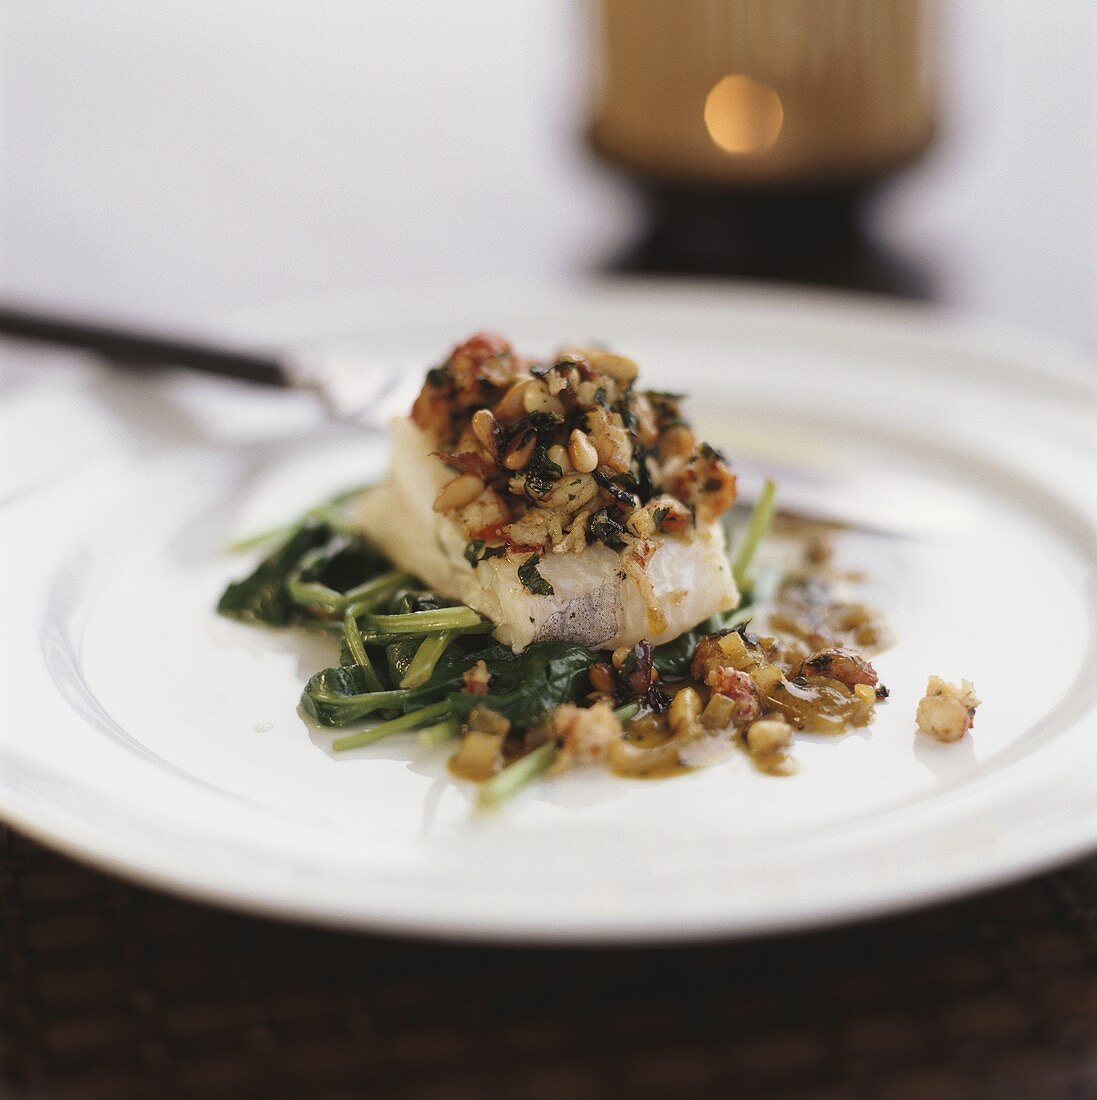 Oven-baked cod with spinach and pine nuts